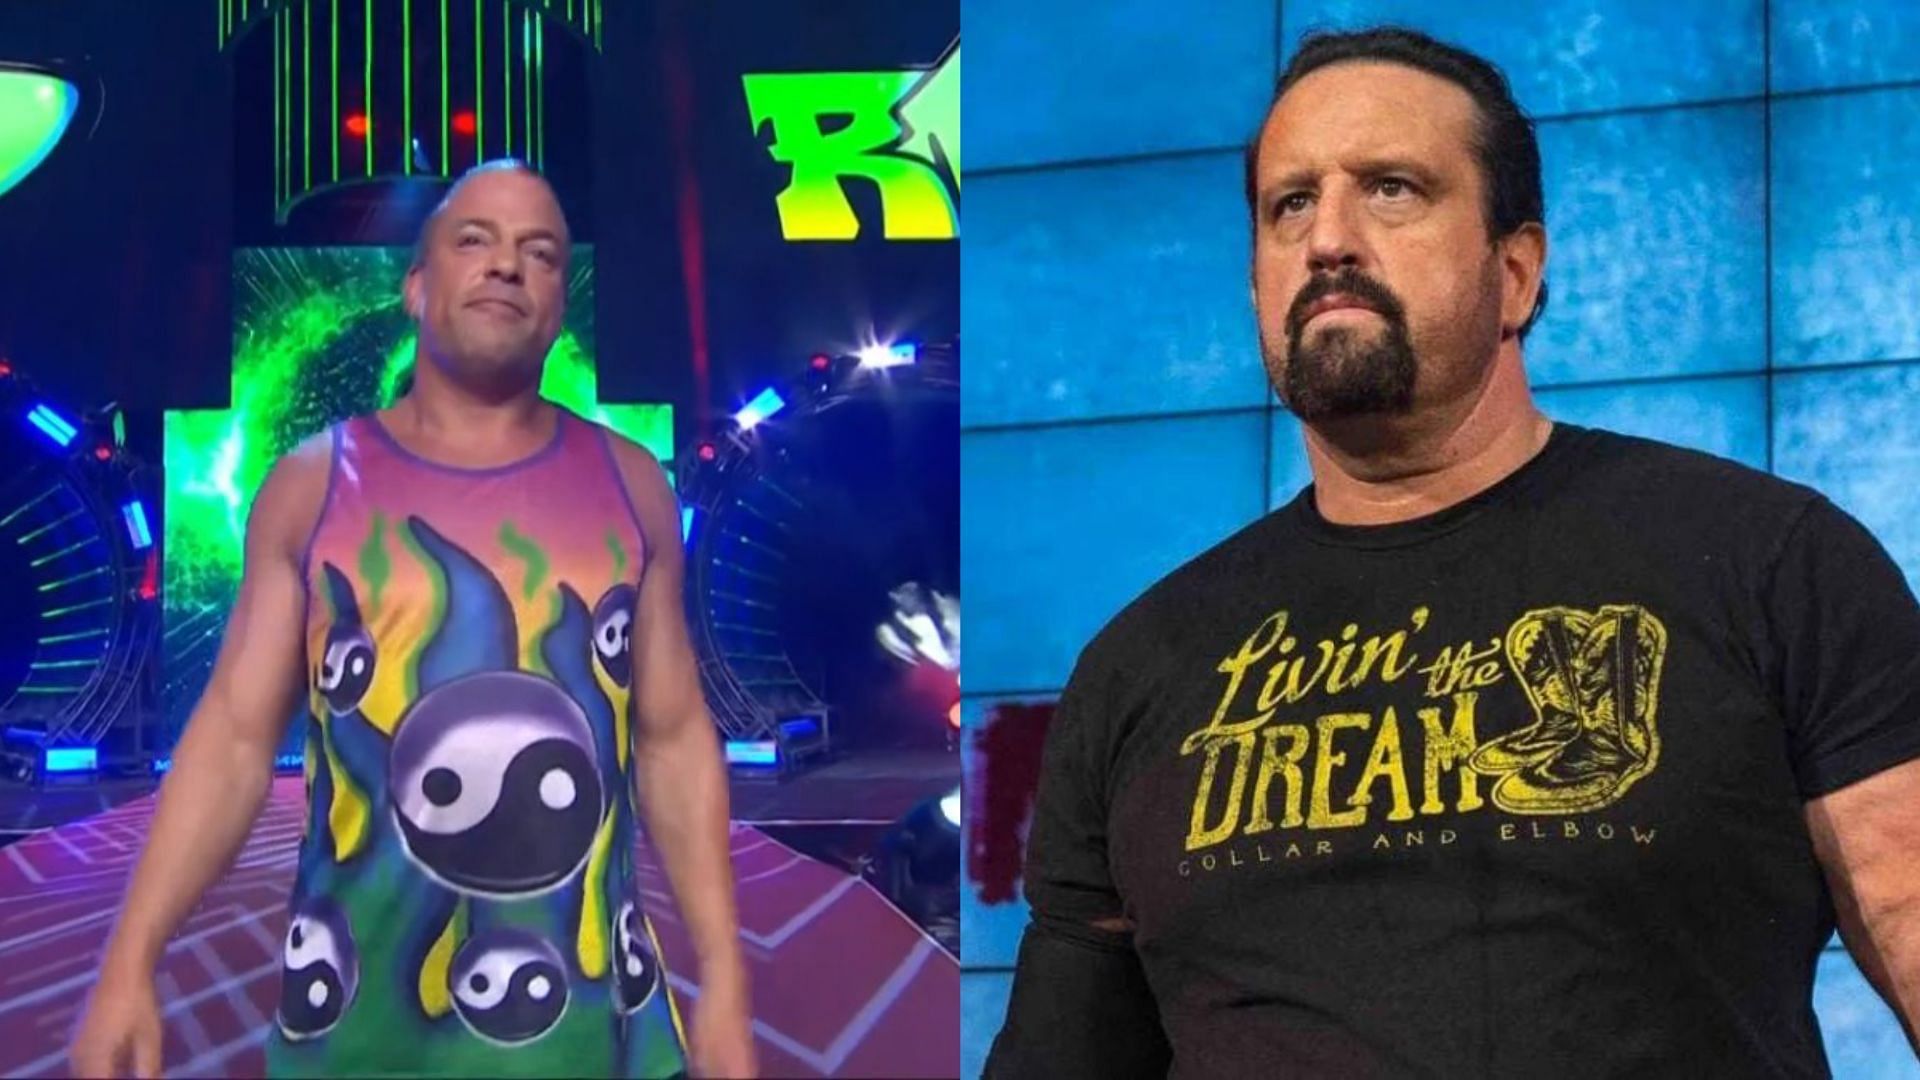 ECW legend Tommy Dreamer reacts to RVD's surprising AEW debut